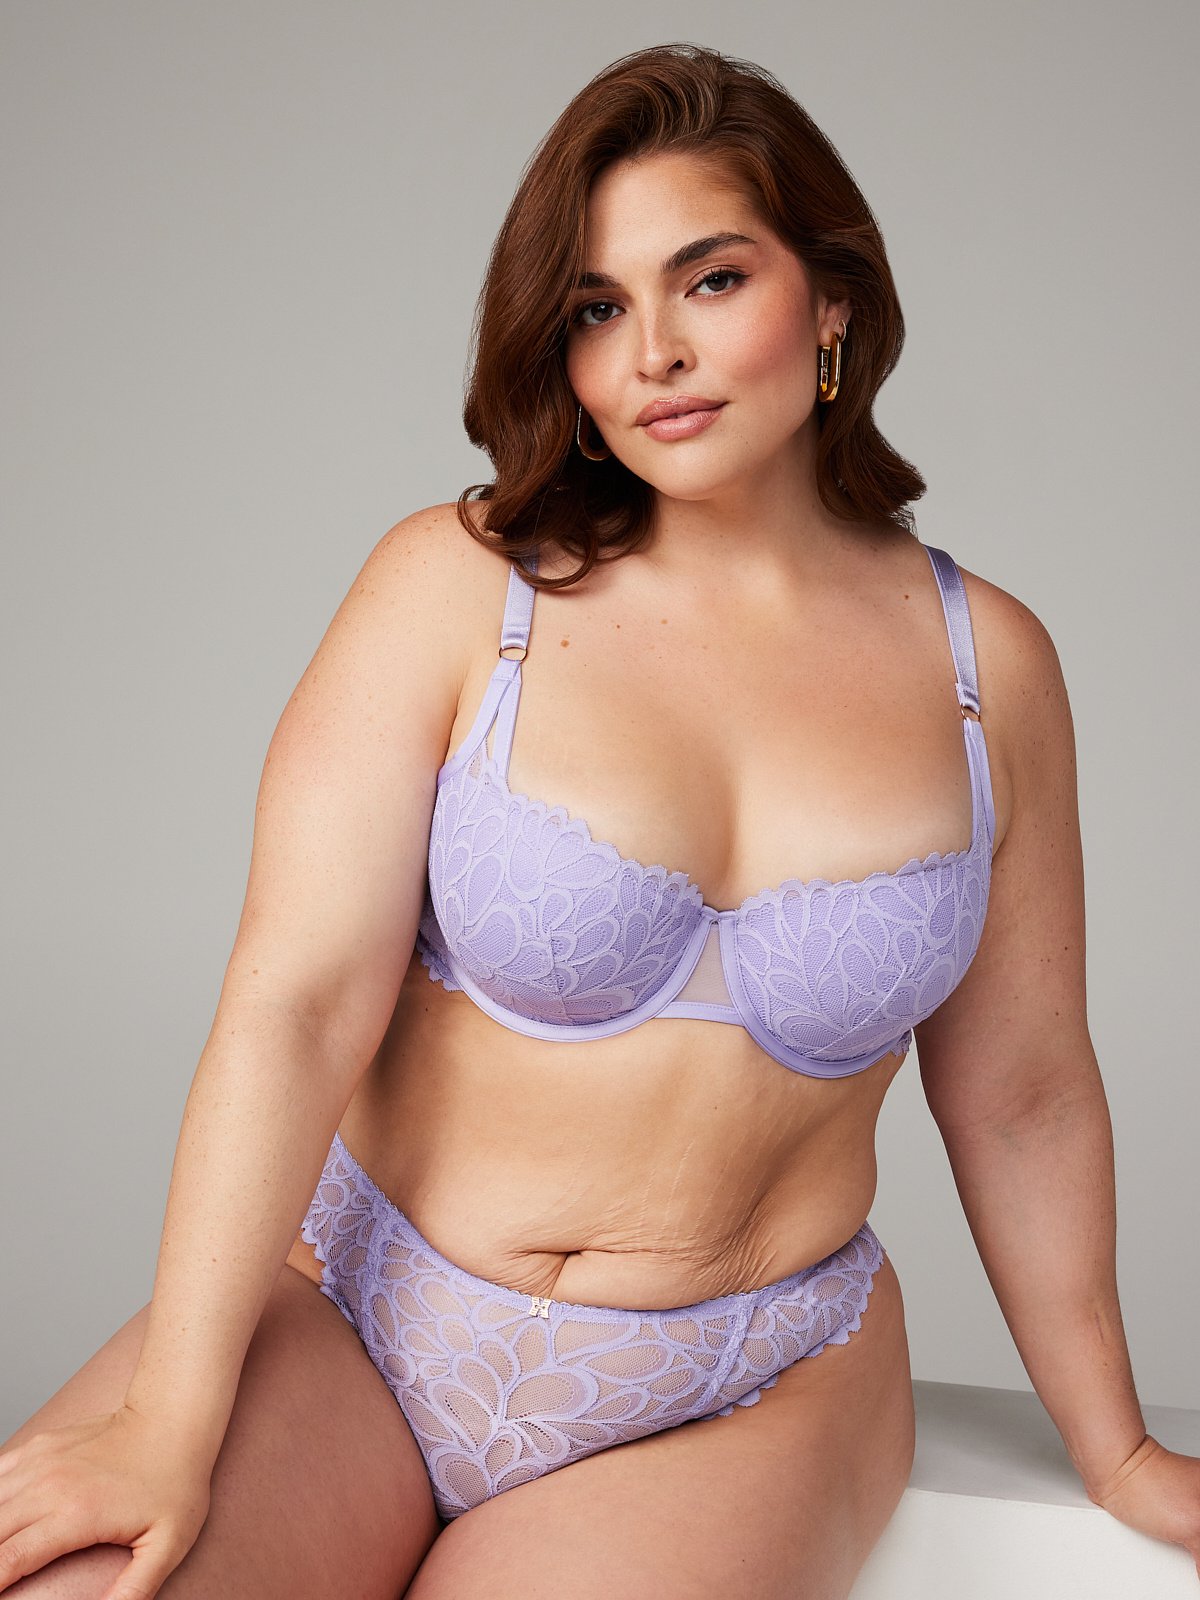 NEW Savage X Fenty Savage Not Sorry Lightly Lined Lace Balconette Bra 40DD  Size undefined - $23 New With Tags - From Crissi